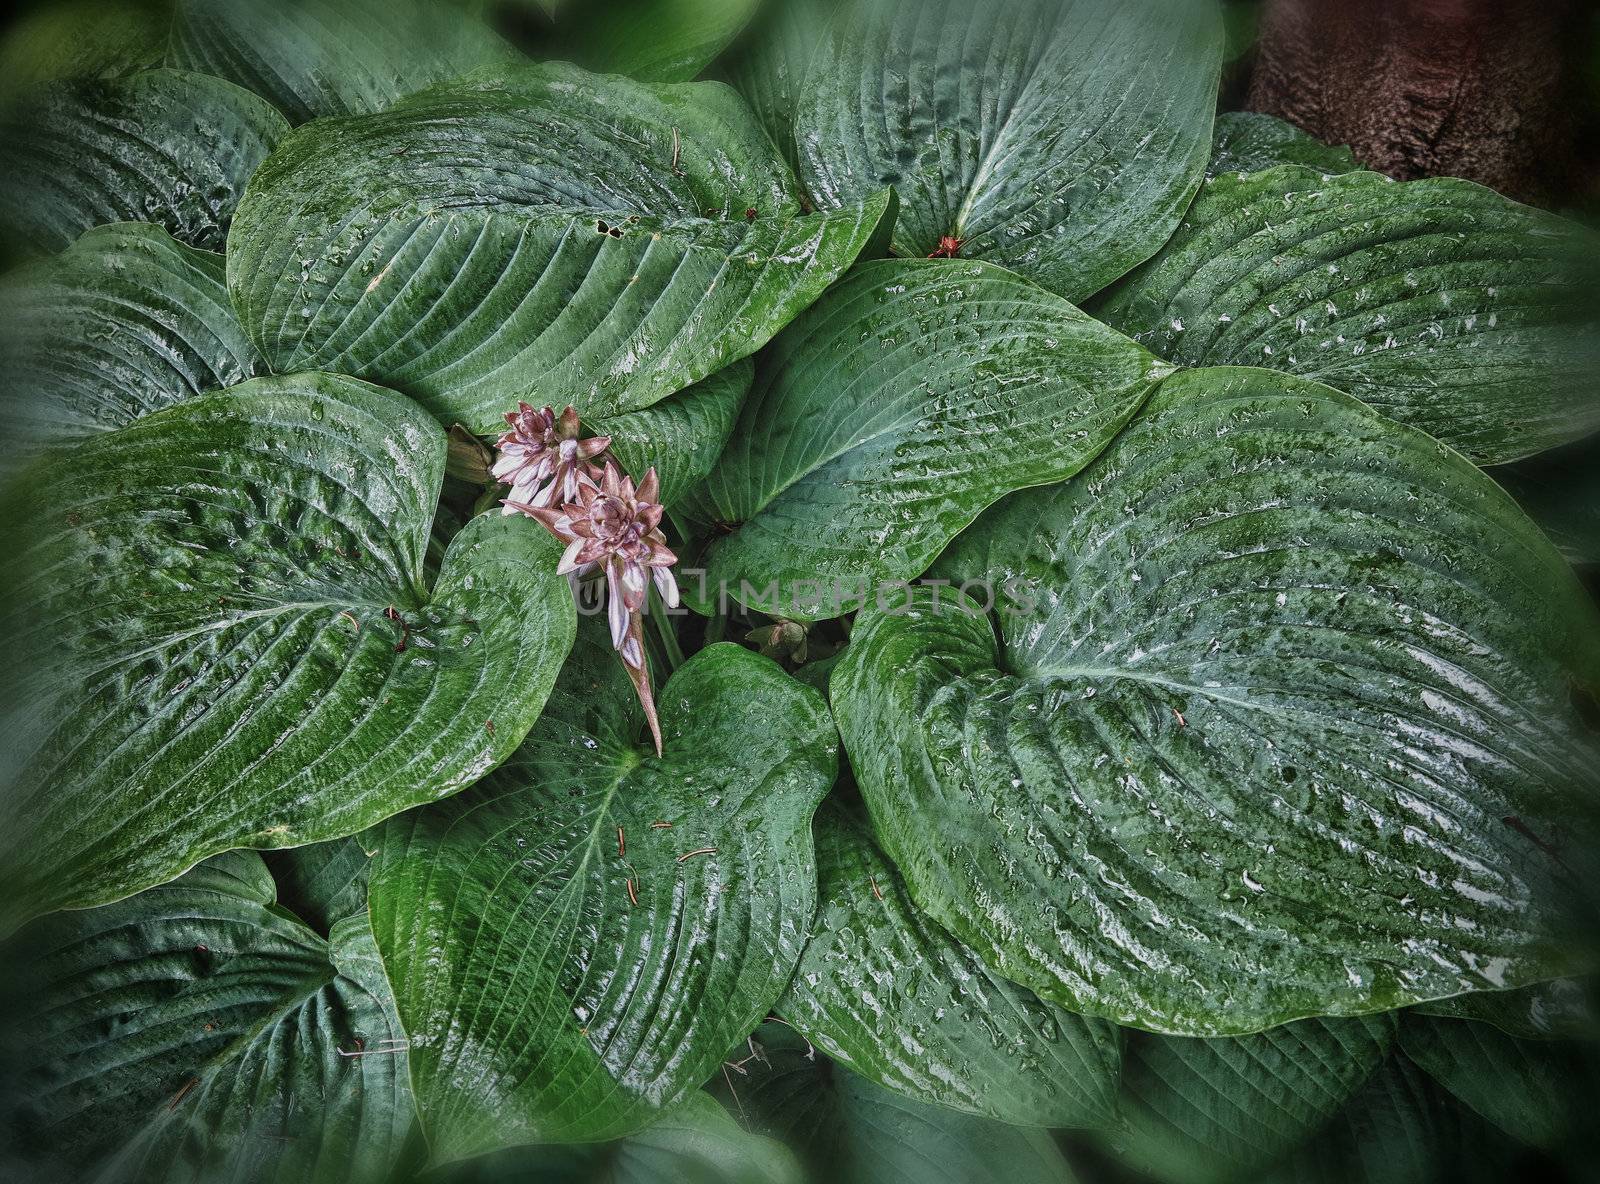 Hosta after rain by ABCDK